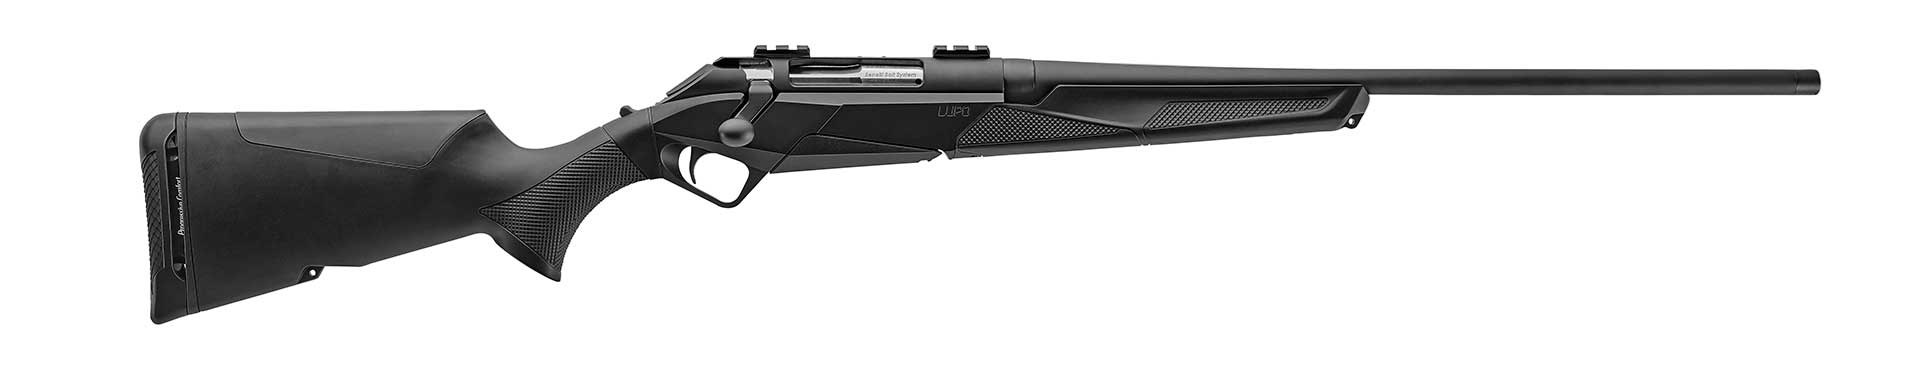 Benelli Lupo rifle right side shown on white.